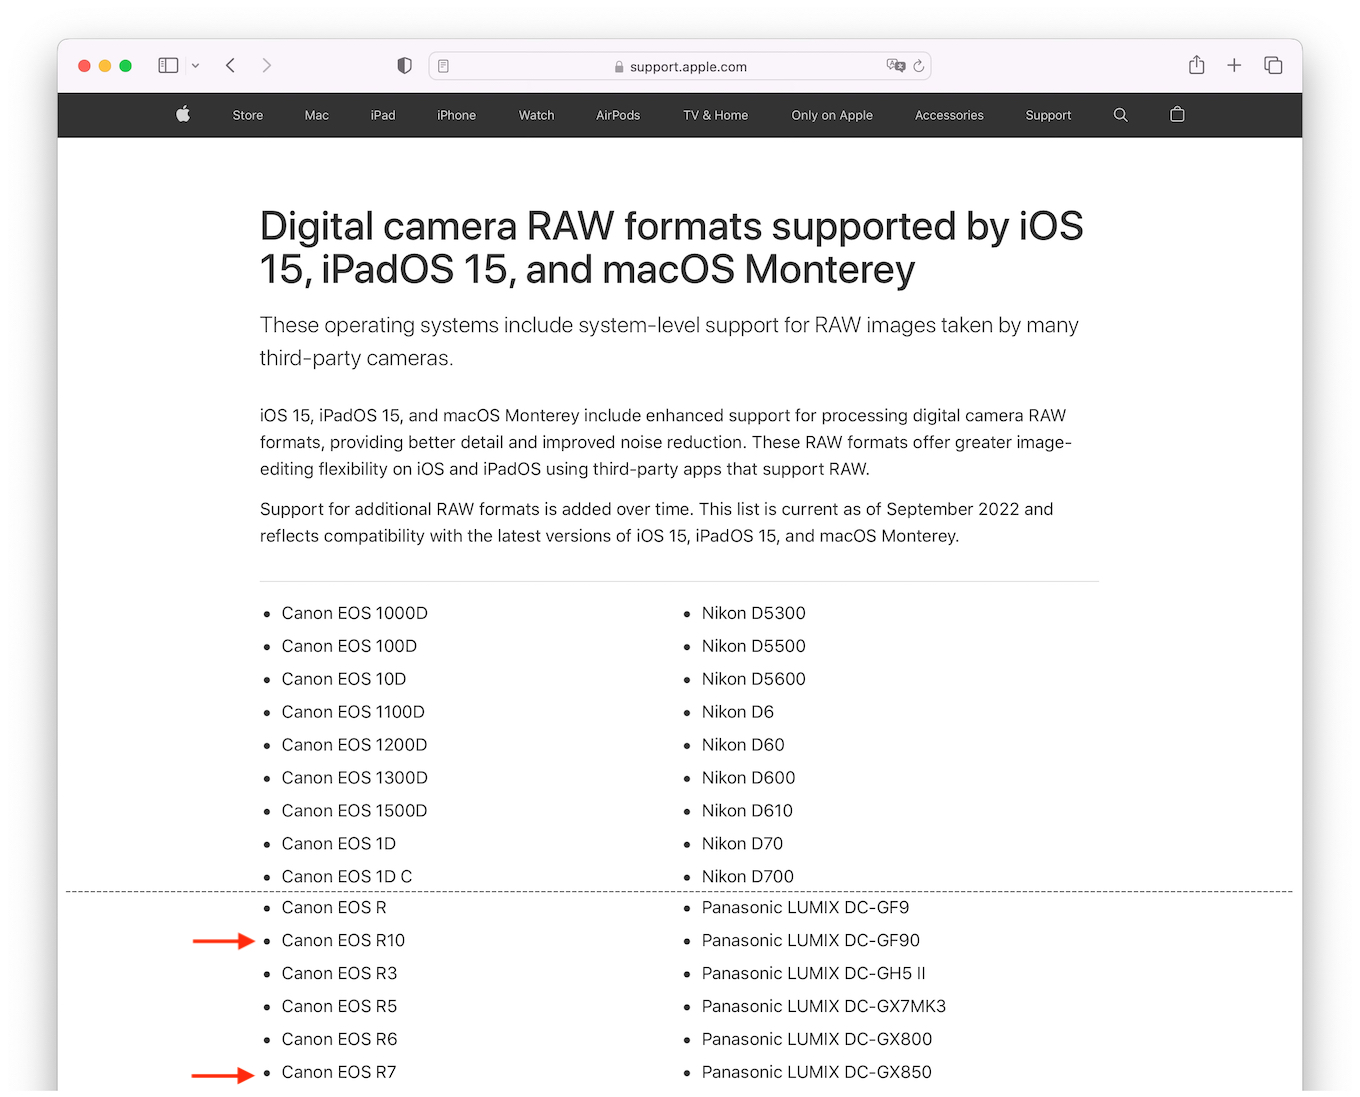 Digital camera RAW formats supported by iOS 15, iPadOS 15, and macOS Monterey